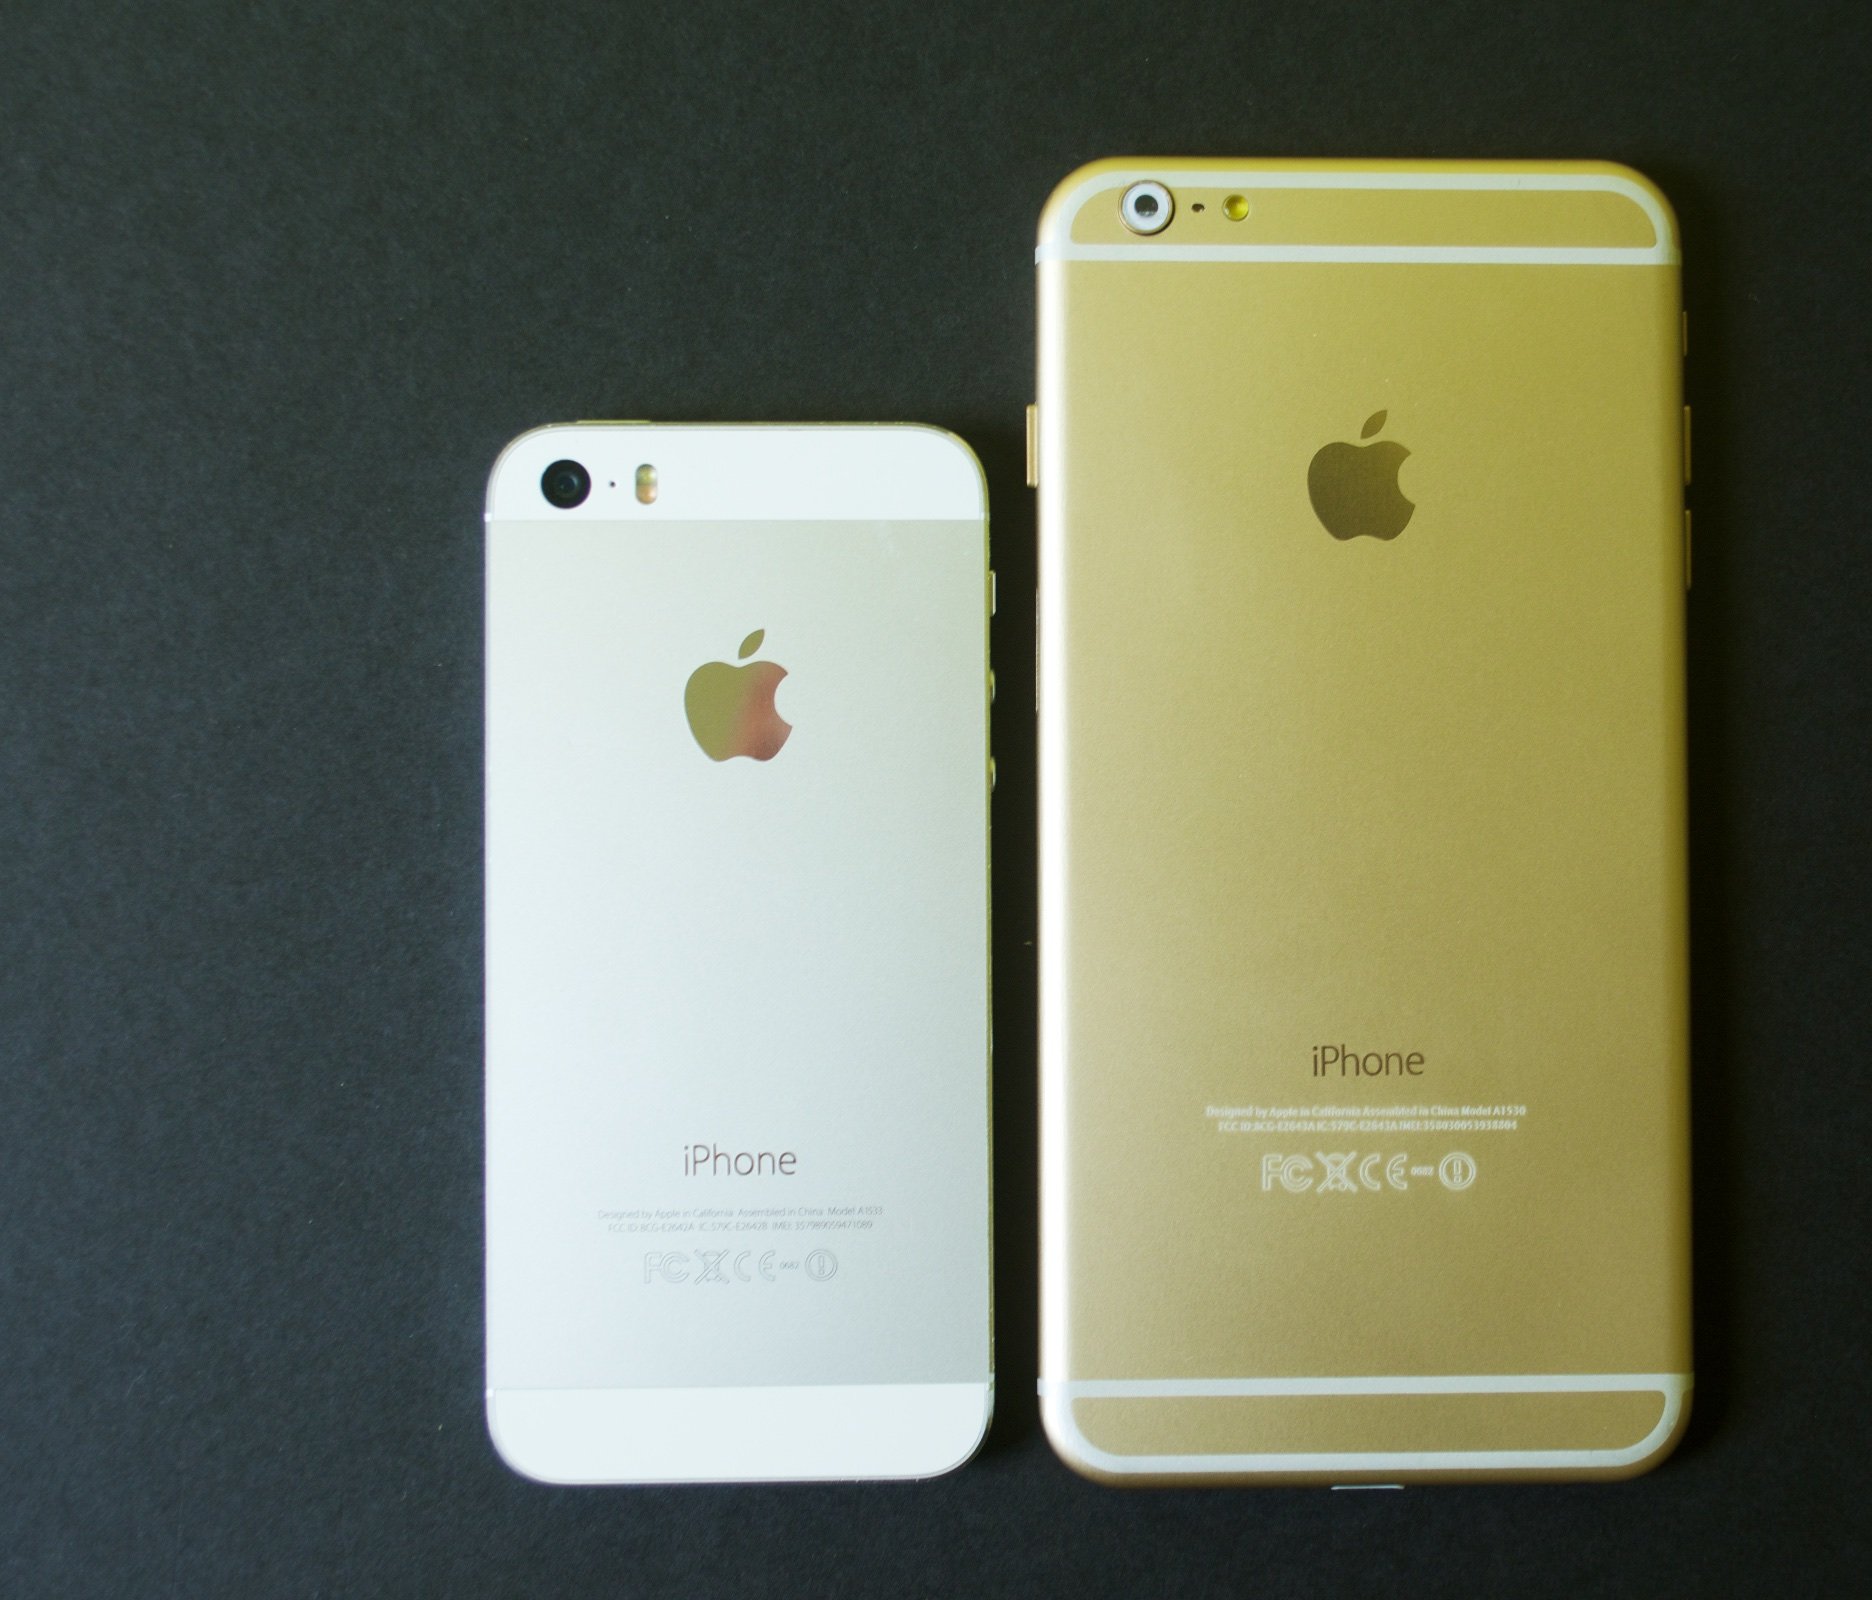 prototype speer Haas iPhone 6 vs iPhone 5s: 5 Things to Know About the Big iPhone